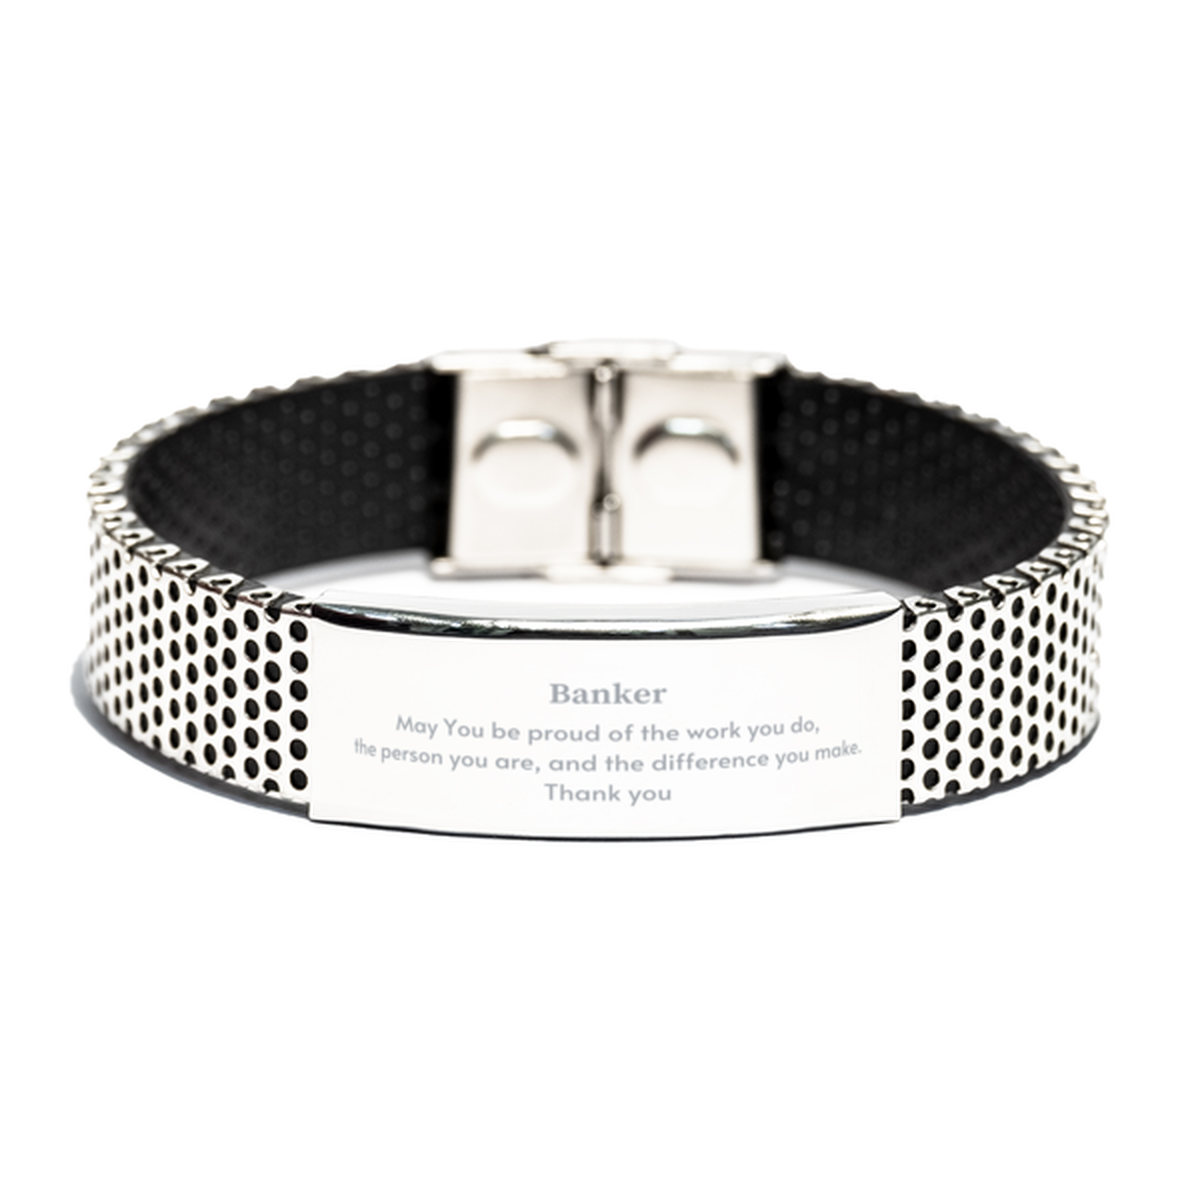 Heartwarming Stainless Steel Bracelet Retirement Coworkers Gifts for Banker, Banker May You be proud of the work you do, the person you are Gifts for Boss Men Women Friends